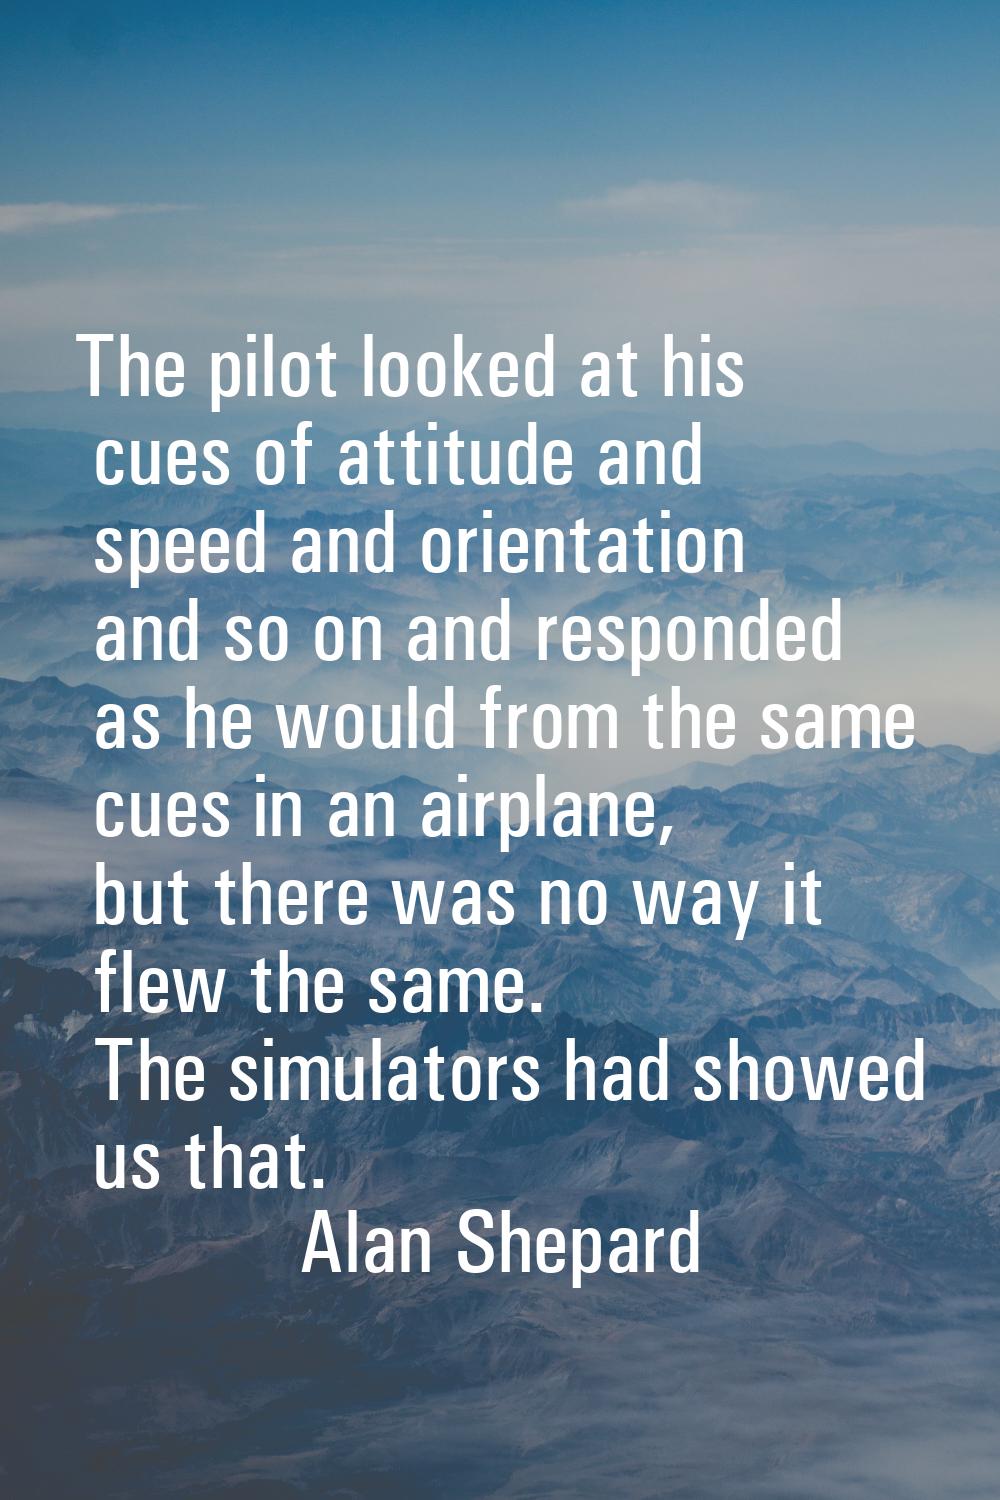 The pilot looked at his cues of attitude and speed and orientation and so on and responded as he wo